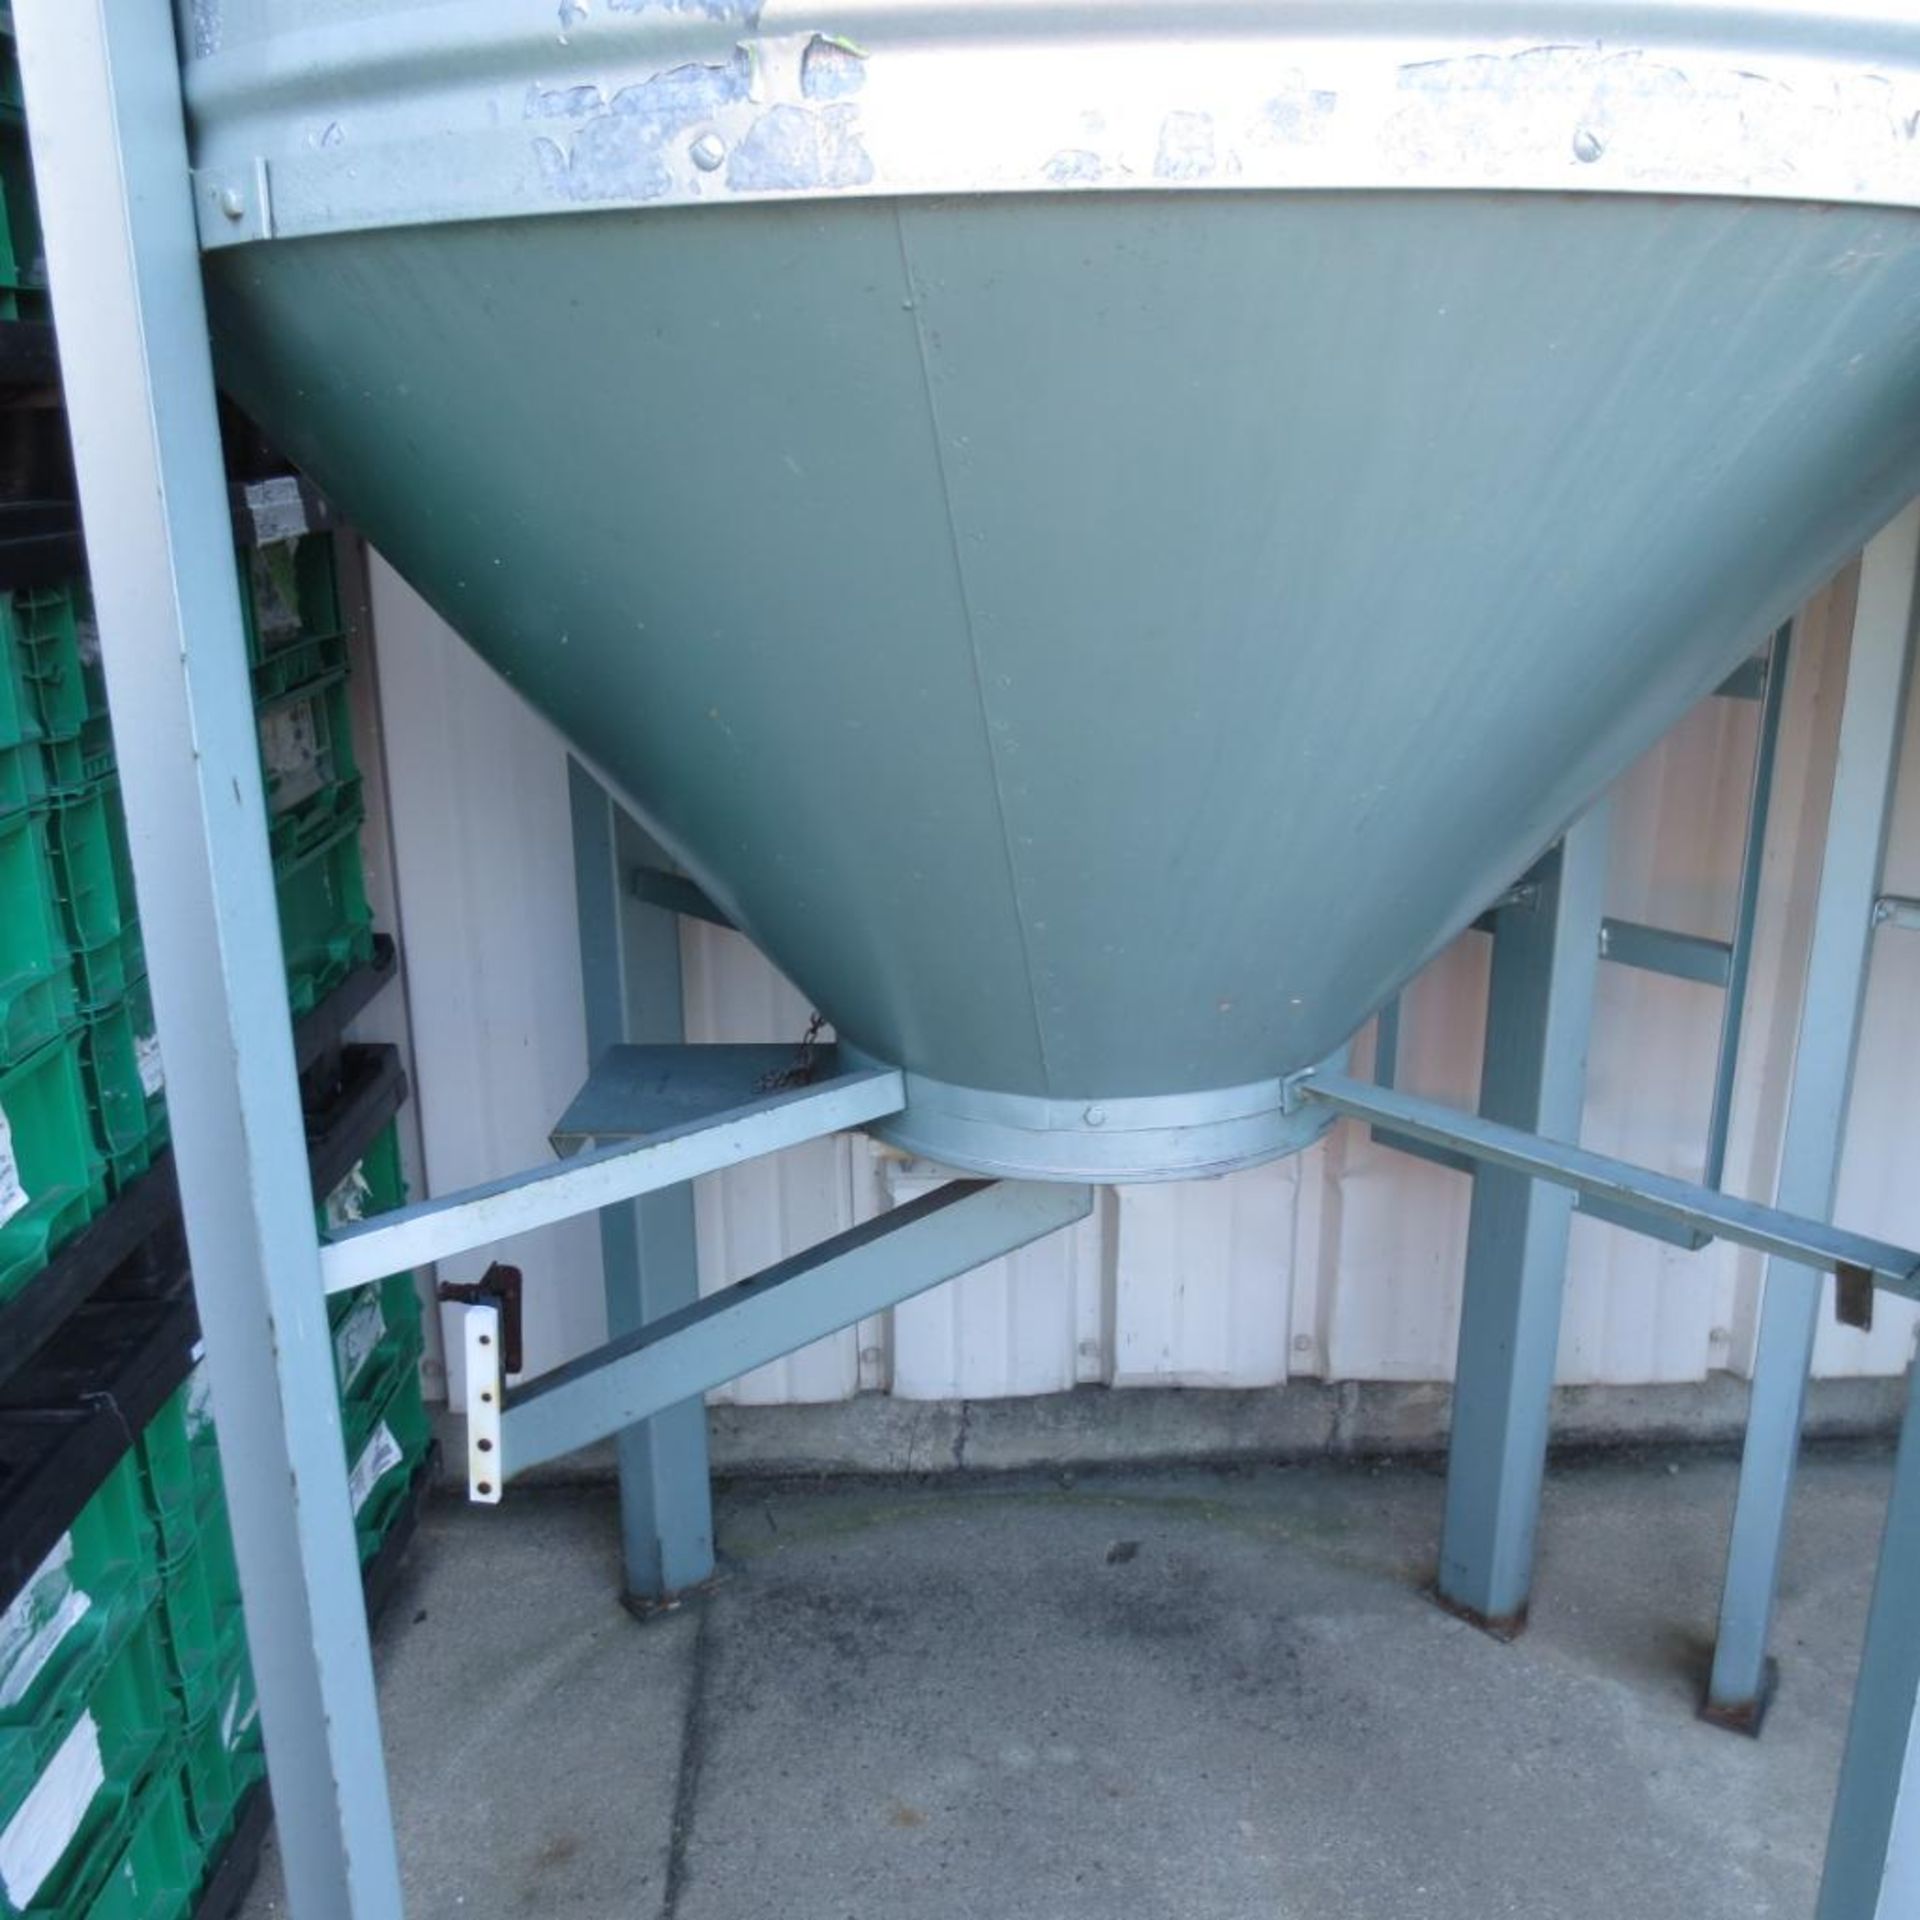 Feed Bins, 56" Wide, 3' located at 707 Burlington Ave Logansport, IN 46947 - Image 2 of 4